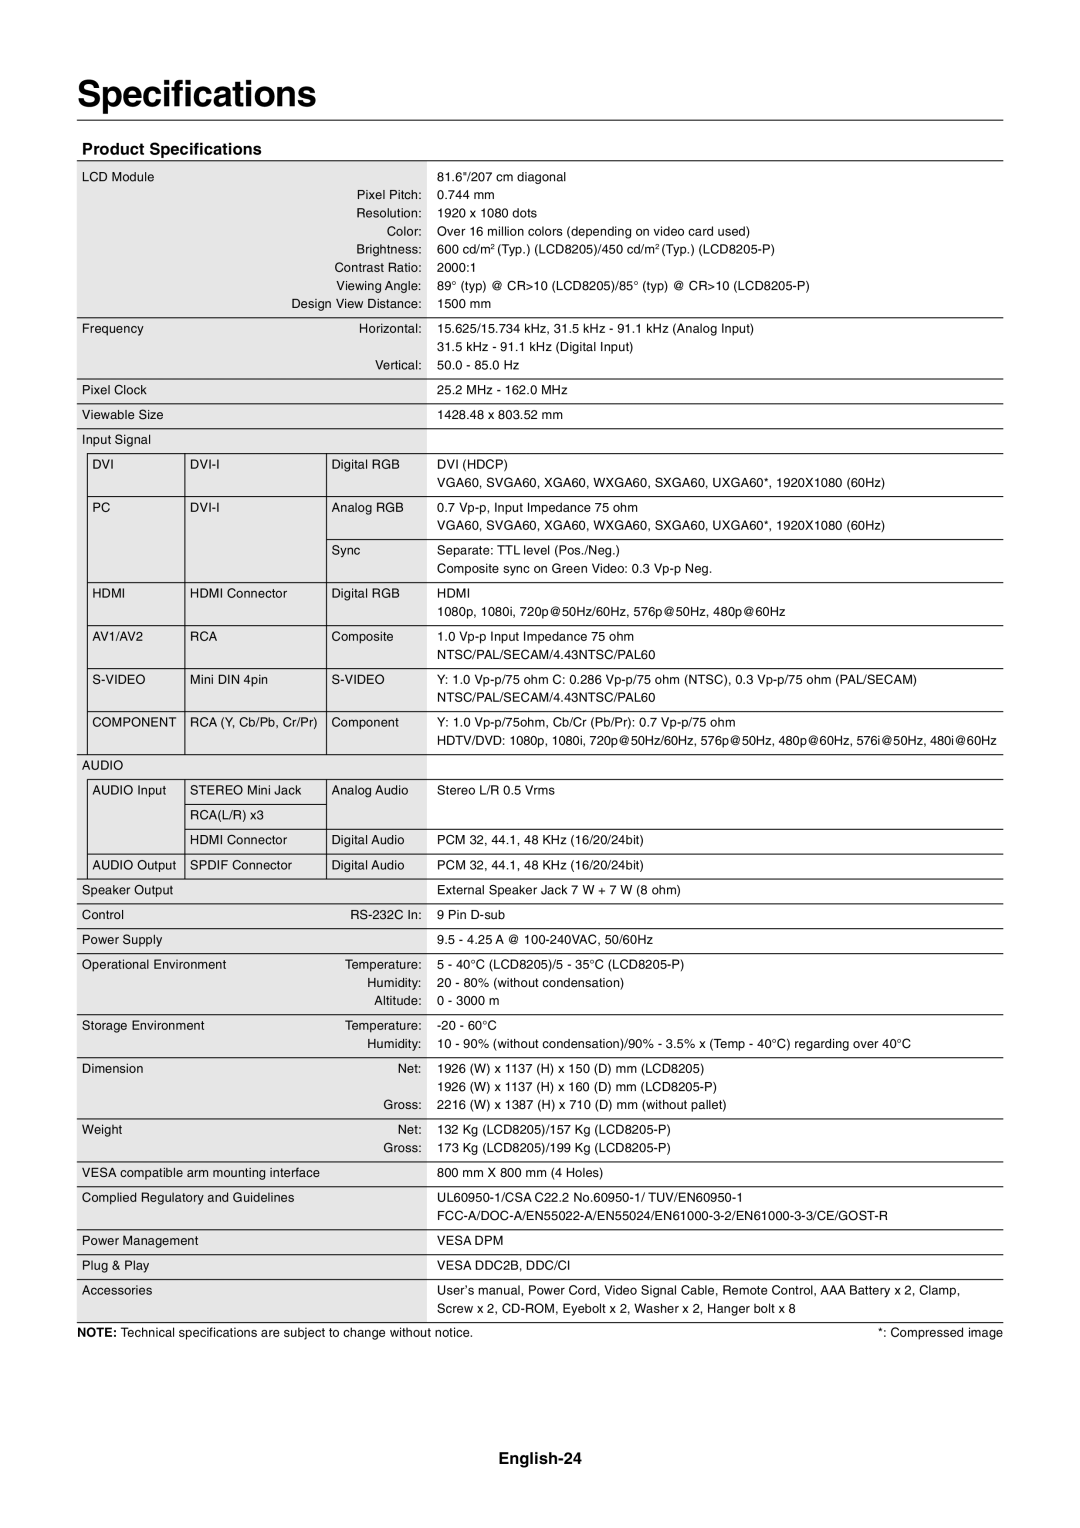 NEC LCD8205-P user manual Product Specifications, English-24 